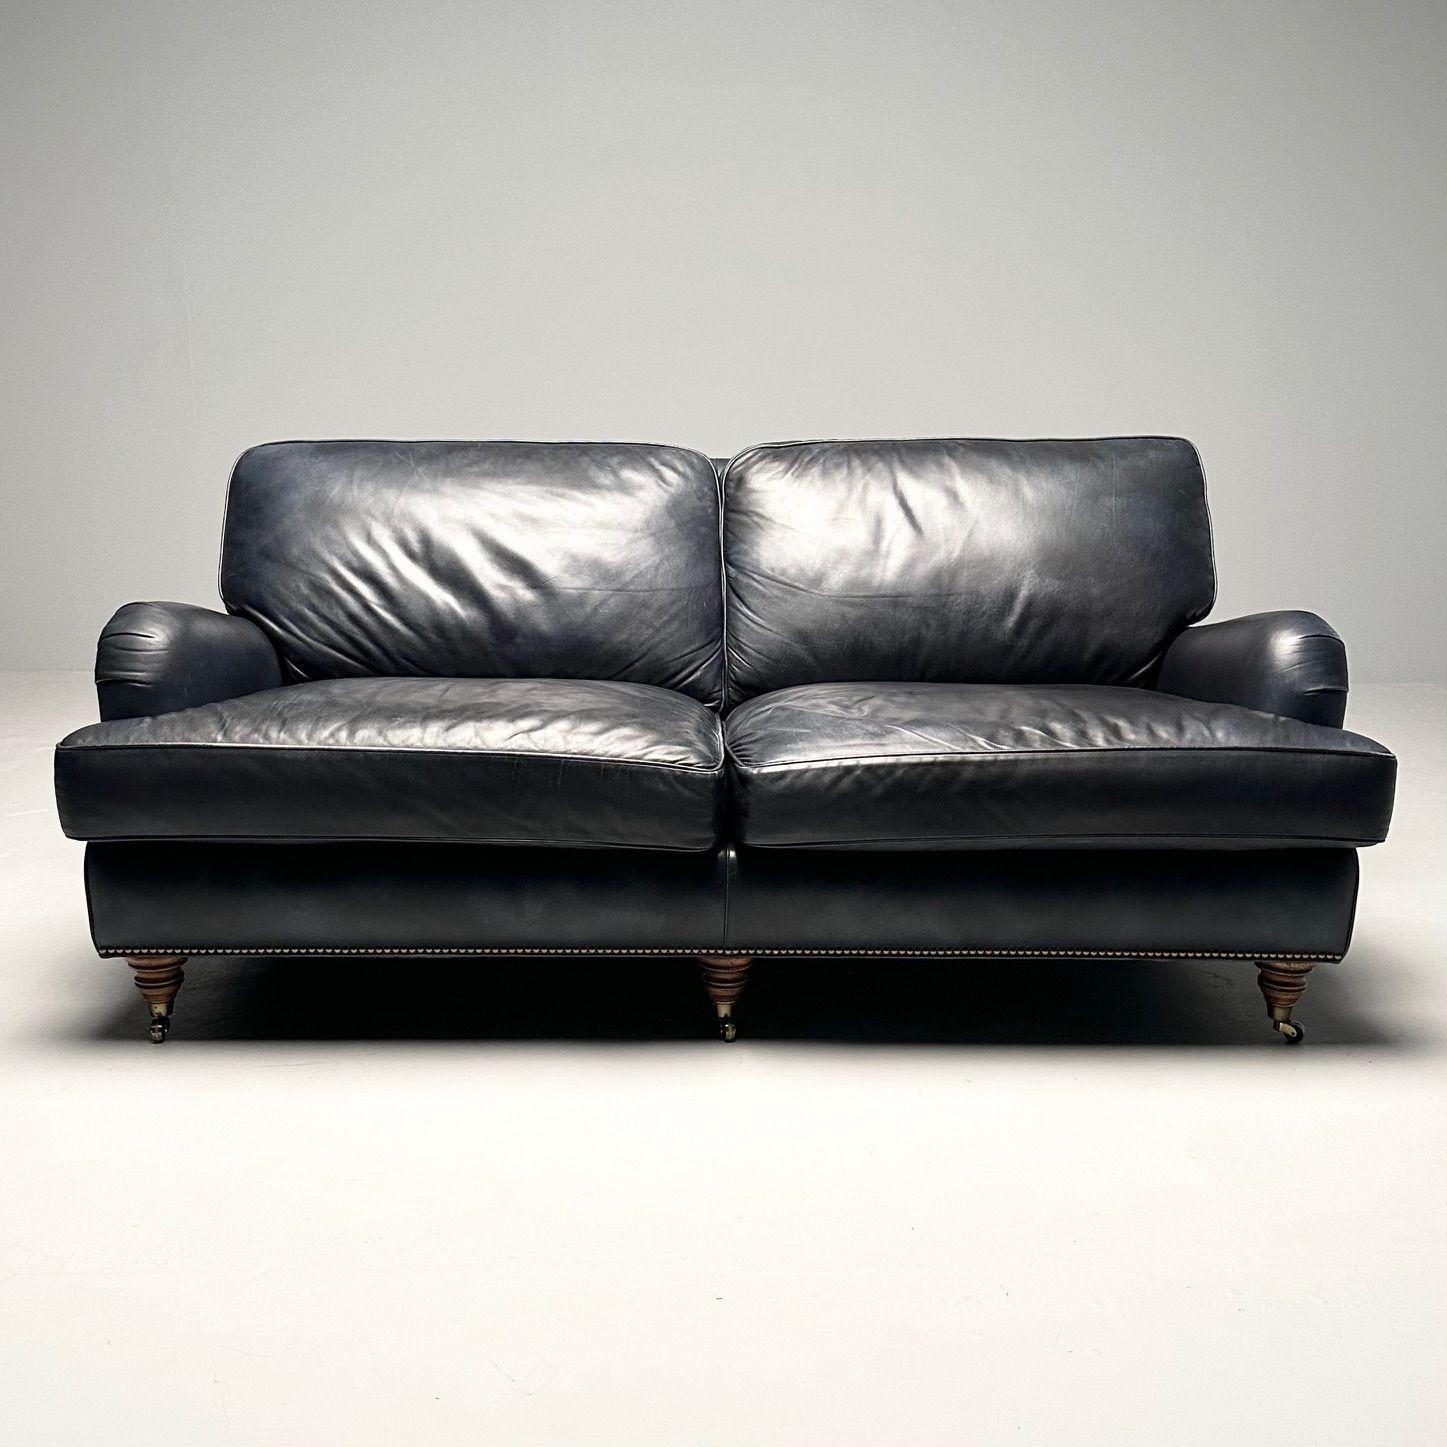 American Hancock and Moore, Georgian Scroll Arm Sofa, Dark Blue Distressed Leather, 2000s For Sale